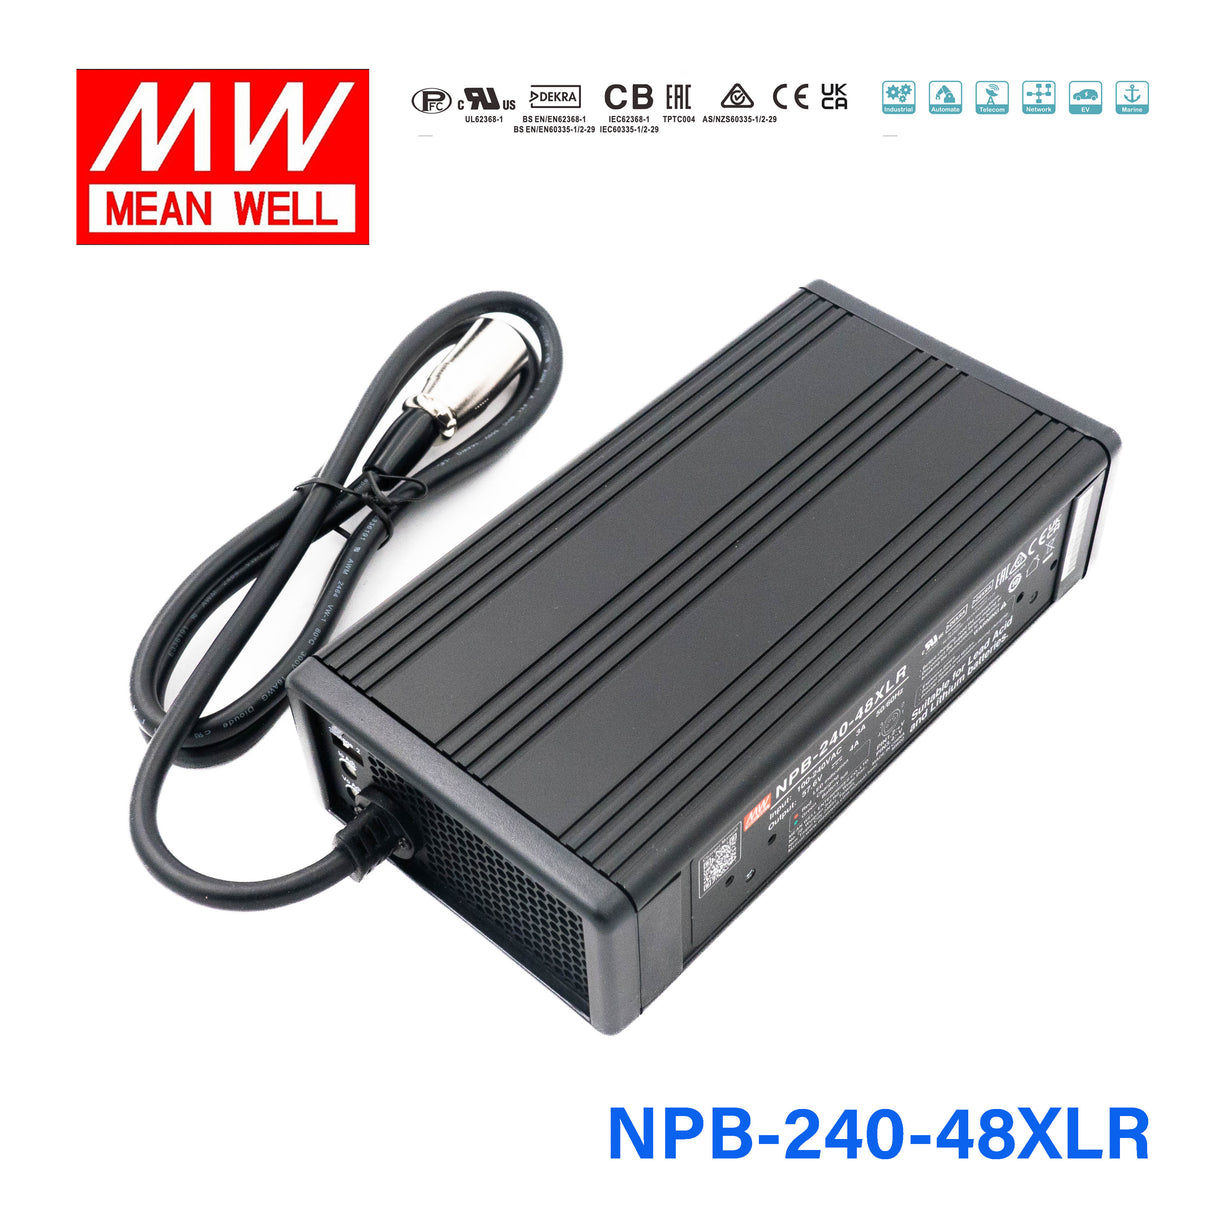 Mean Well NPB-240-48XLR Battery Charger 240W 48V 3 Pin Power Pin